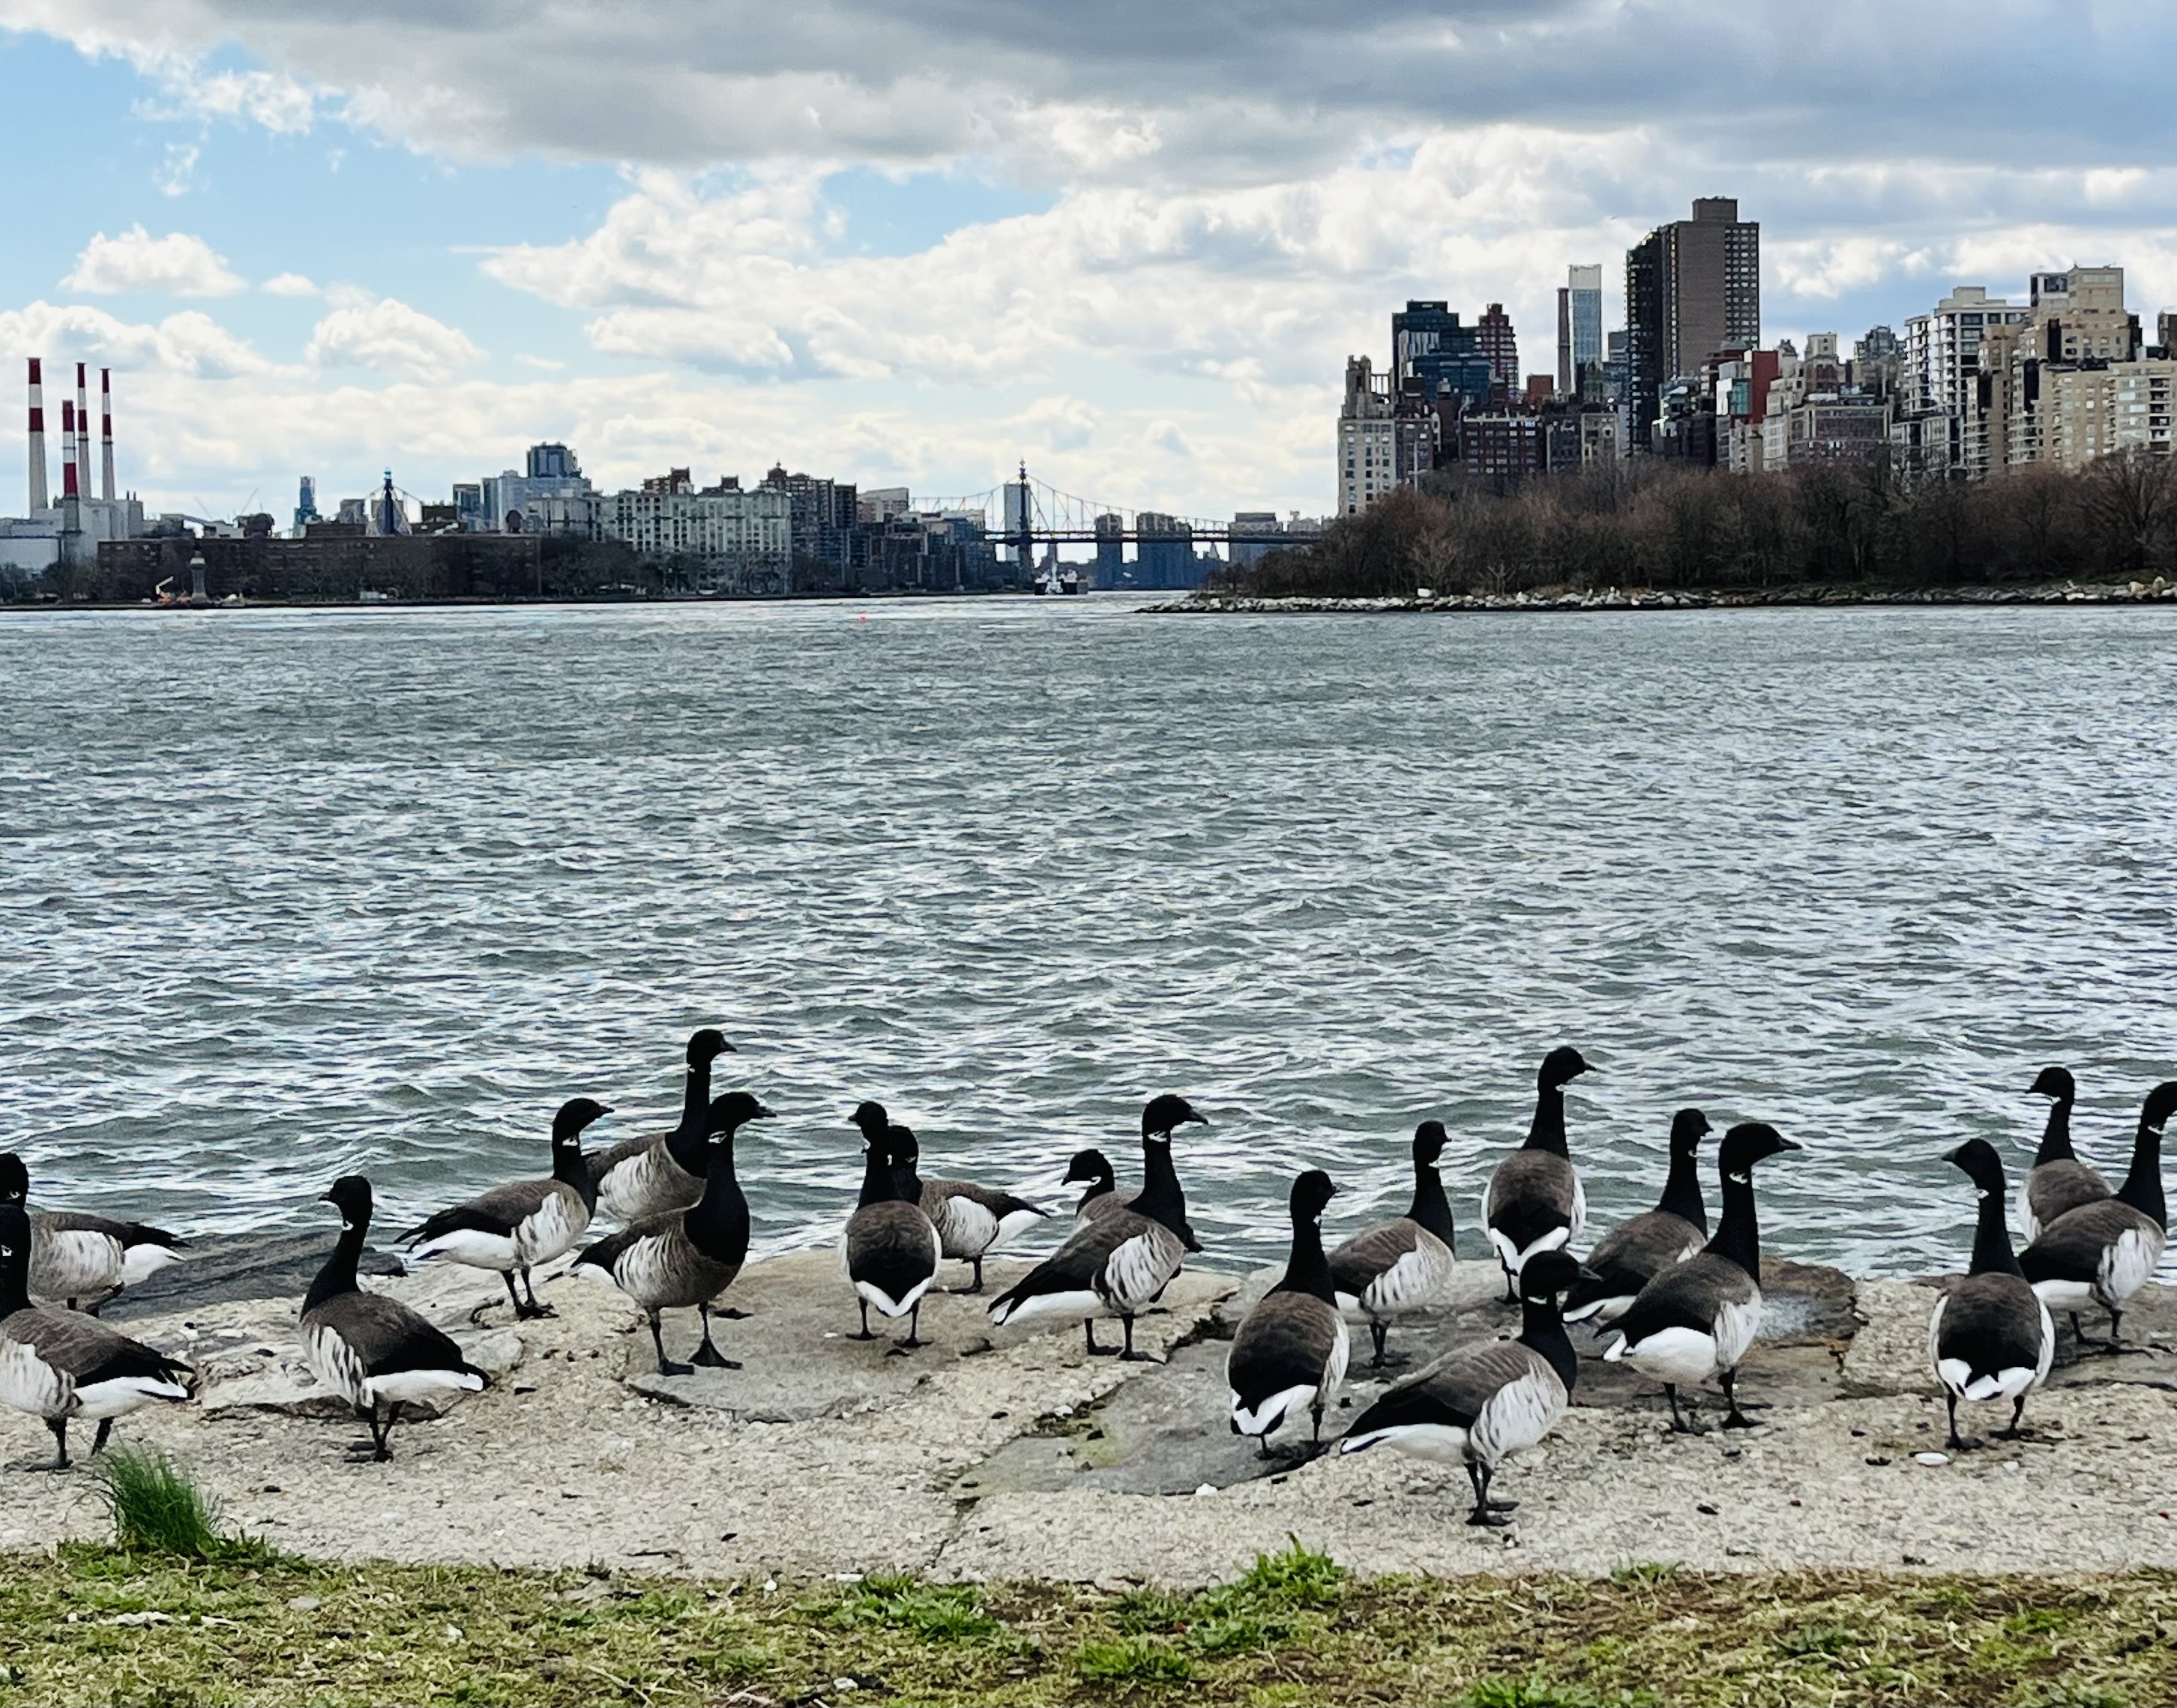 Geese gathered on the shore of Randall's Island.